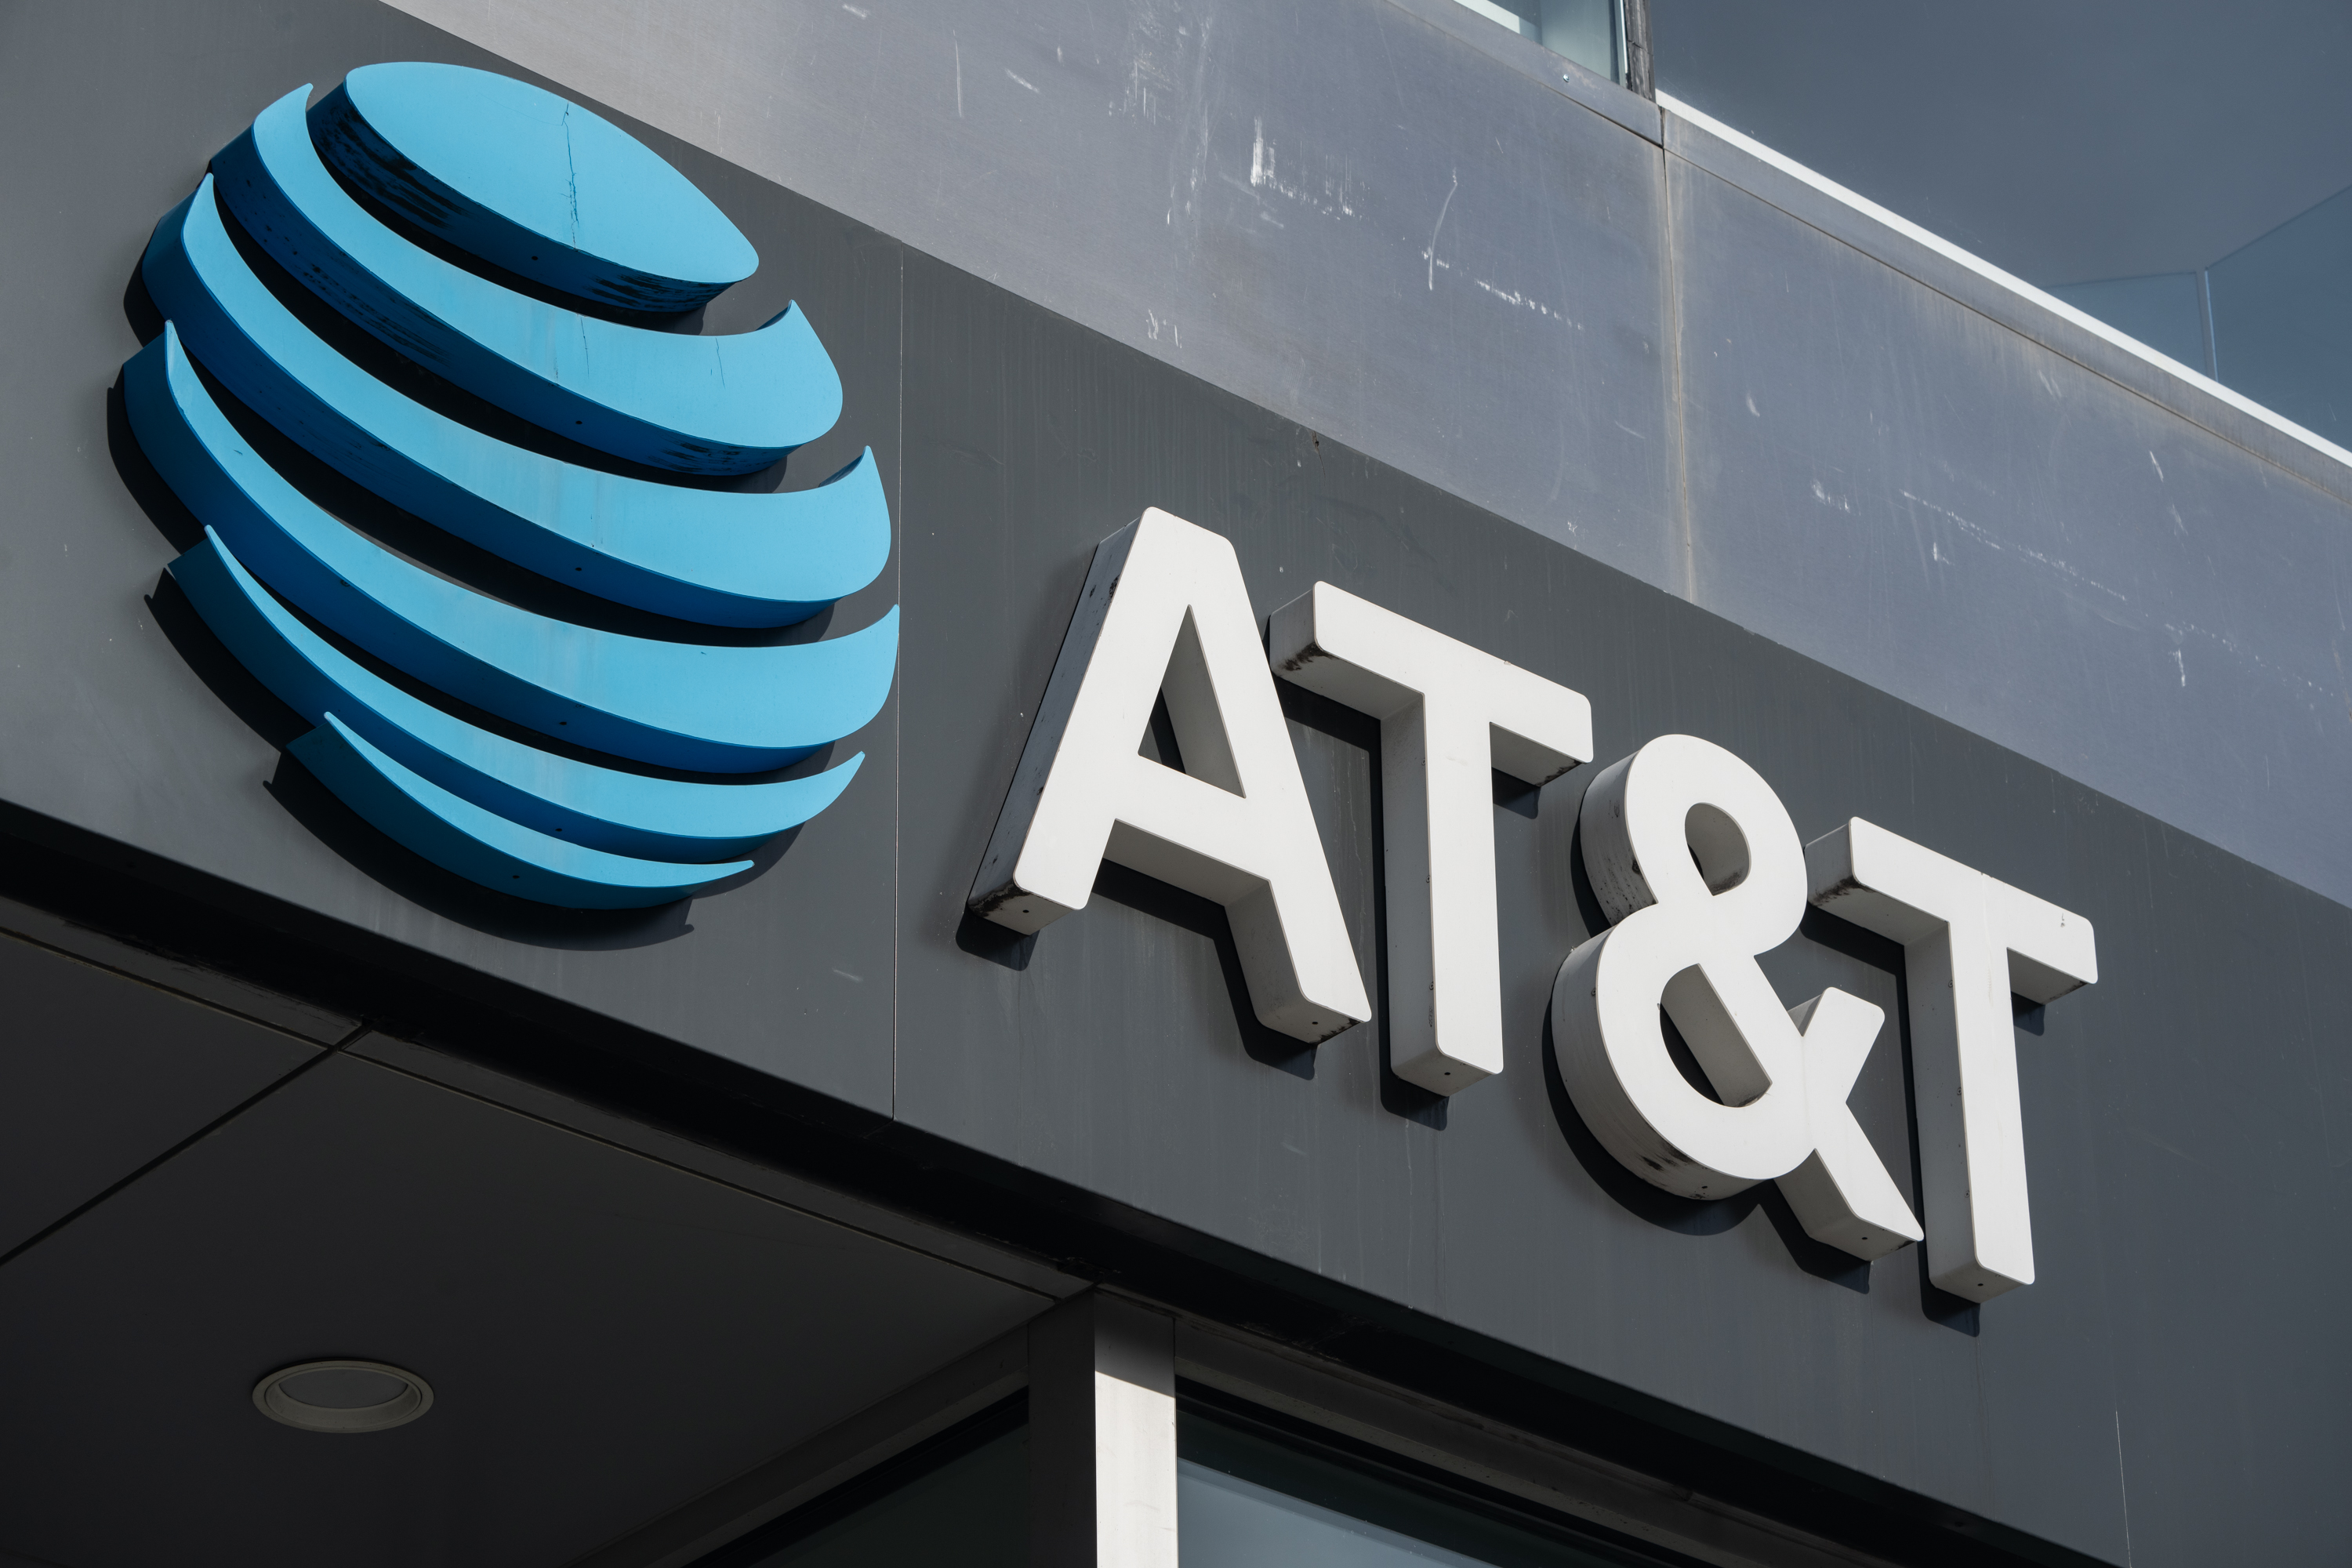 AT&T says US cellphone network outage was not caused by a cyberattack